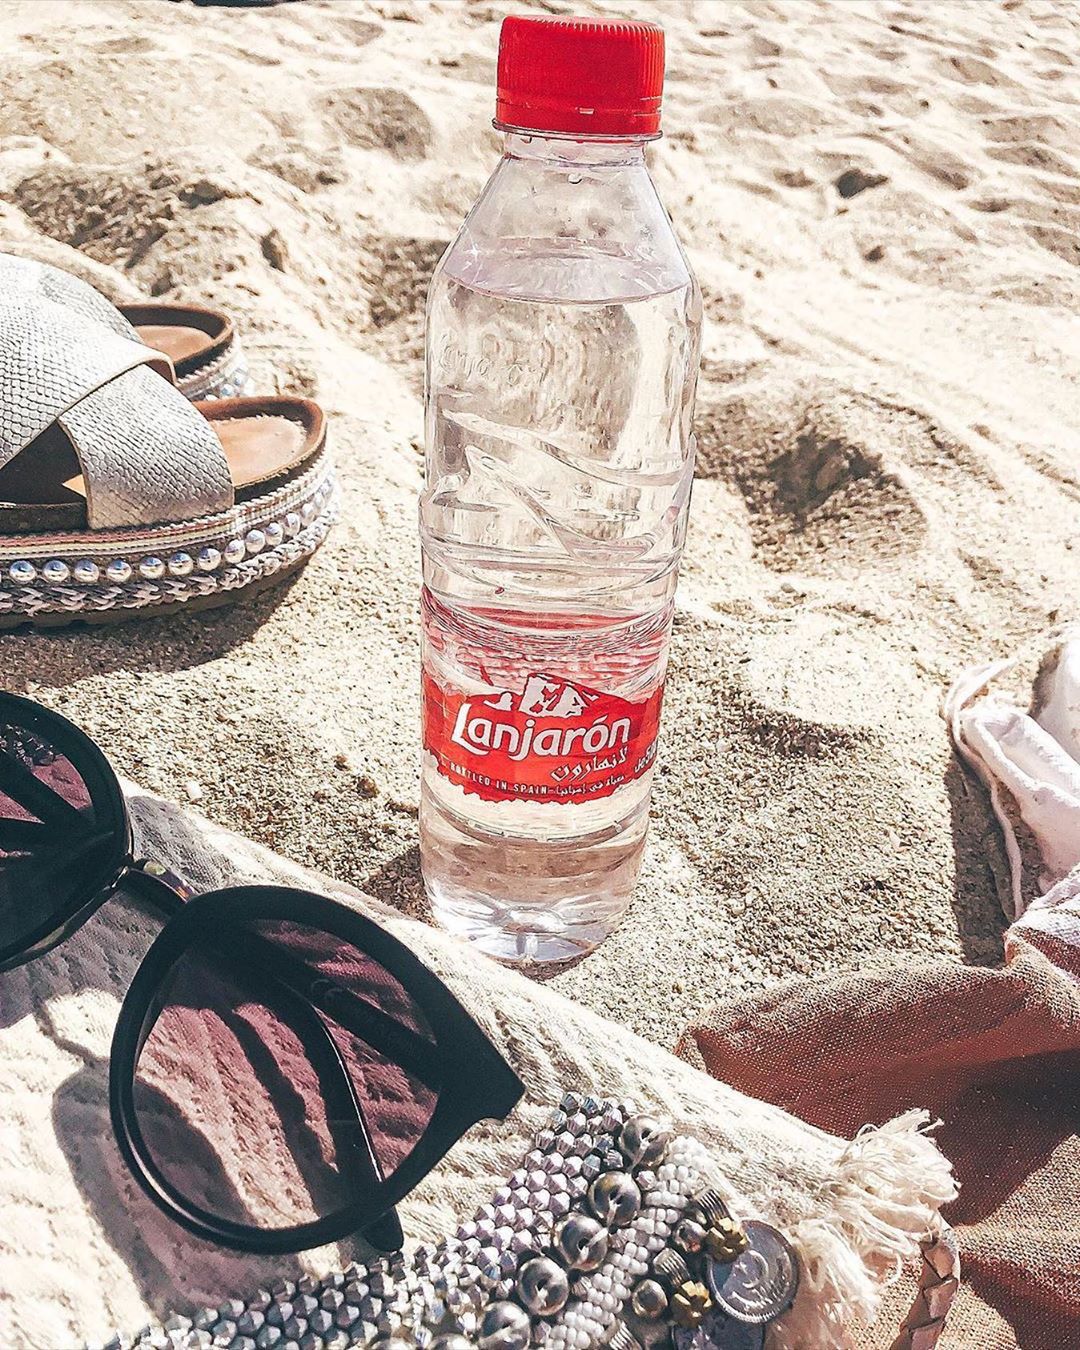 Since beaches around the UAE are starting to reopen 🏖 Grab your essential #LanjaronWater and enjoy the sun ☀️💧 . . . . #stayhydrated #puremineralwater #lanjaron #uae #summervibe